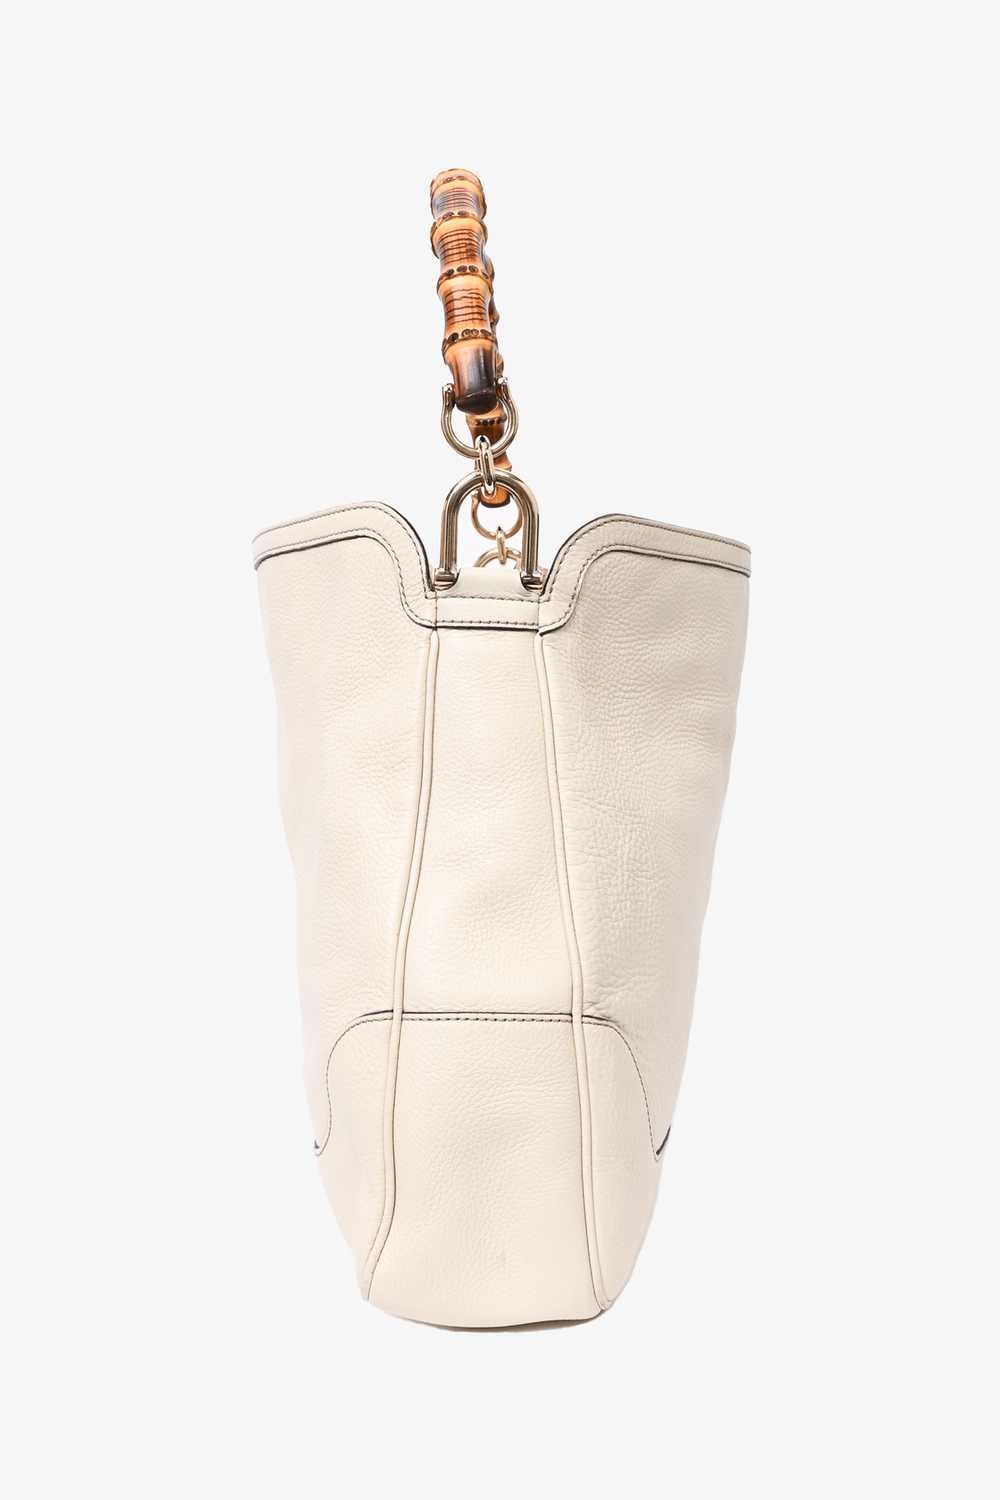 Gucci Cream Leather Bamboo 'Diana' Large Tote - image 5